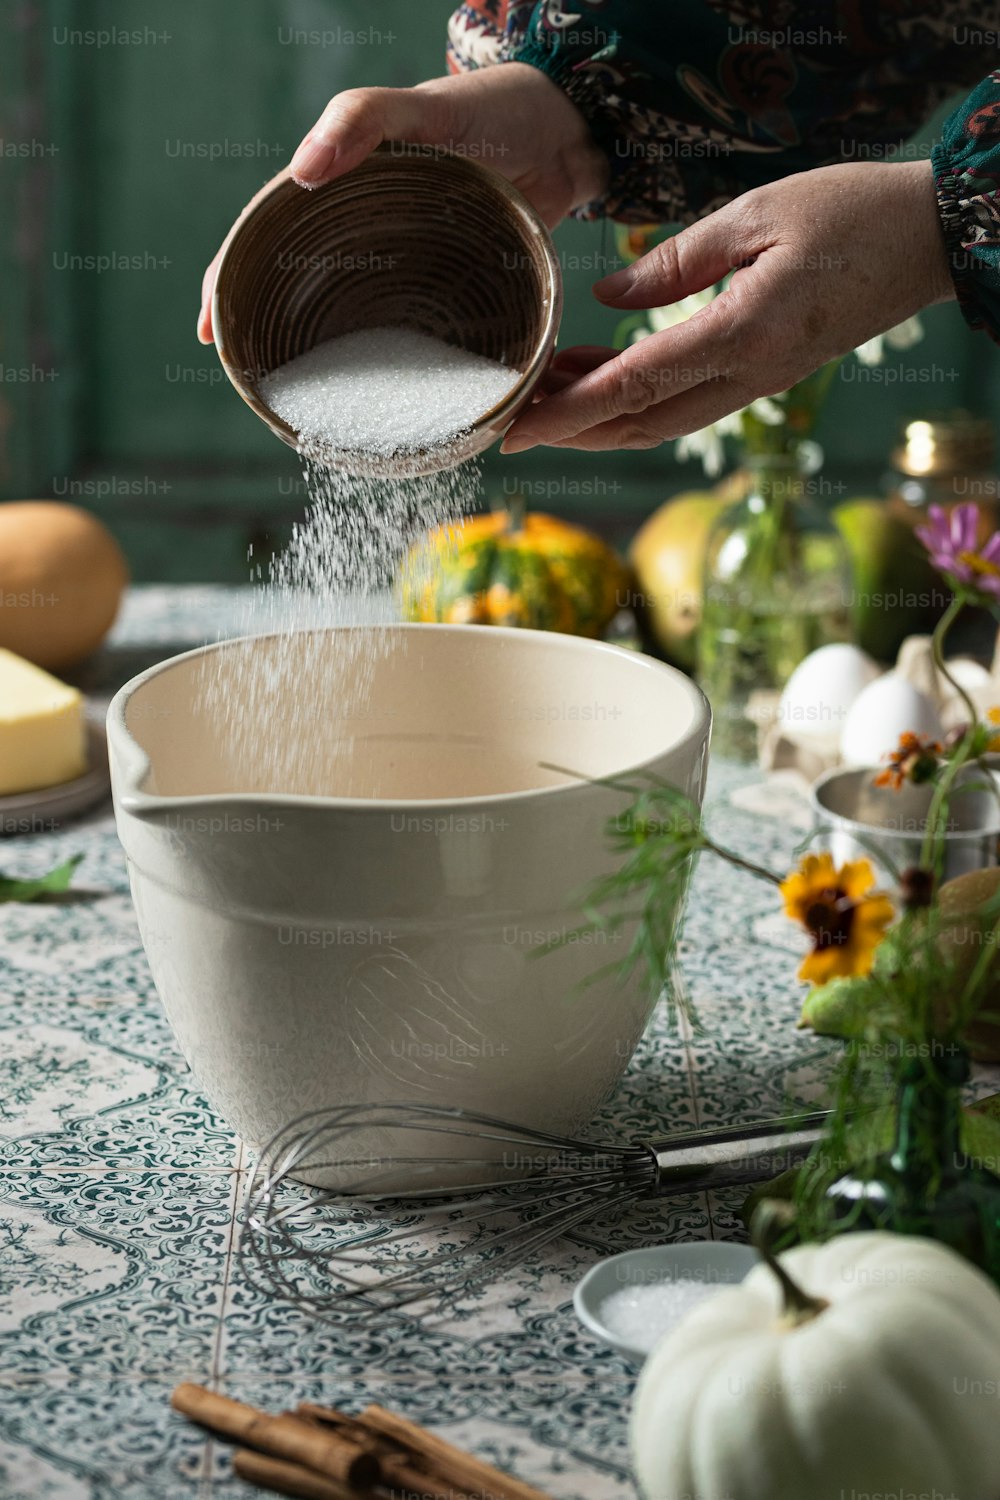 a person pouring sugar into a bowl on a table